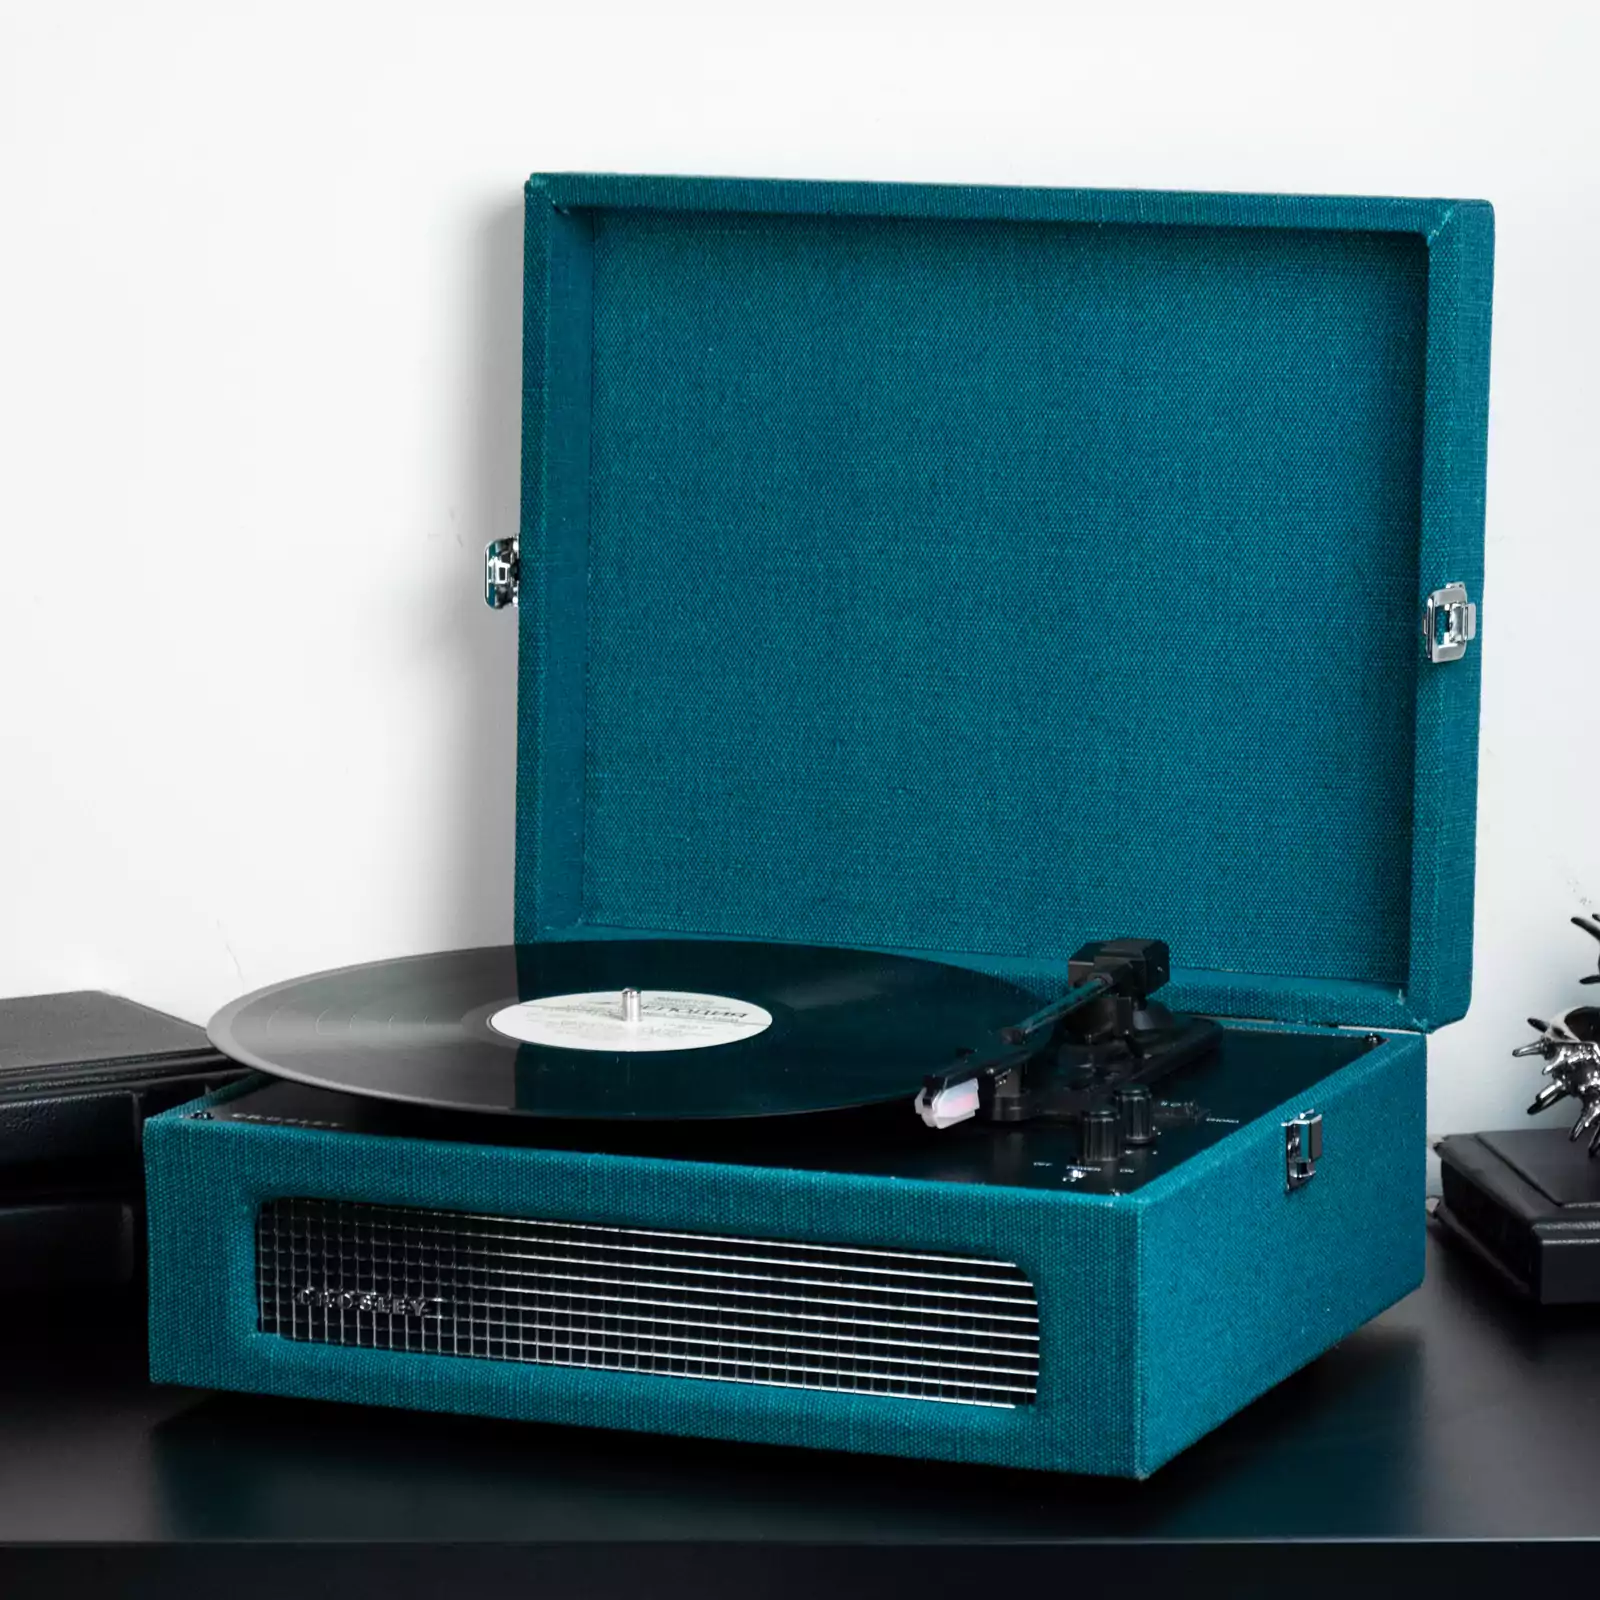 Vinyl player "Voyager Portable Turntable with Bluetooth In/Out Dark Aegean" by Crosley